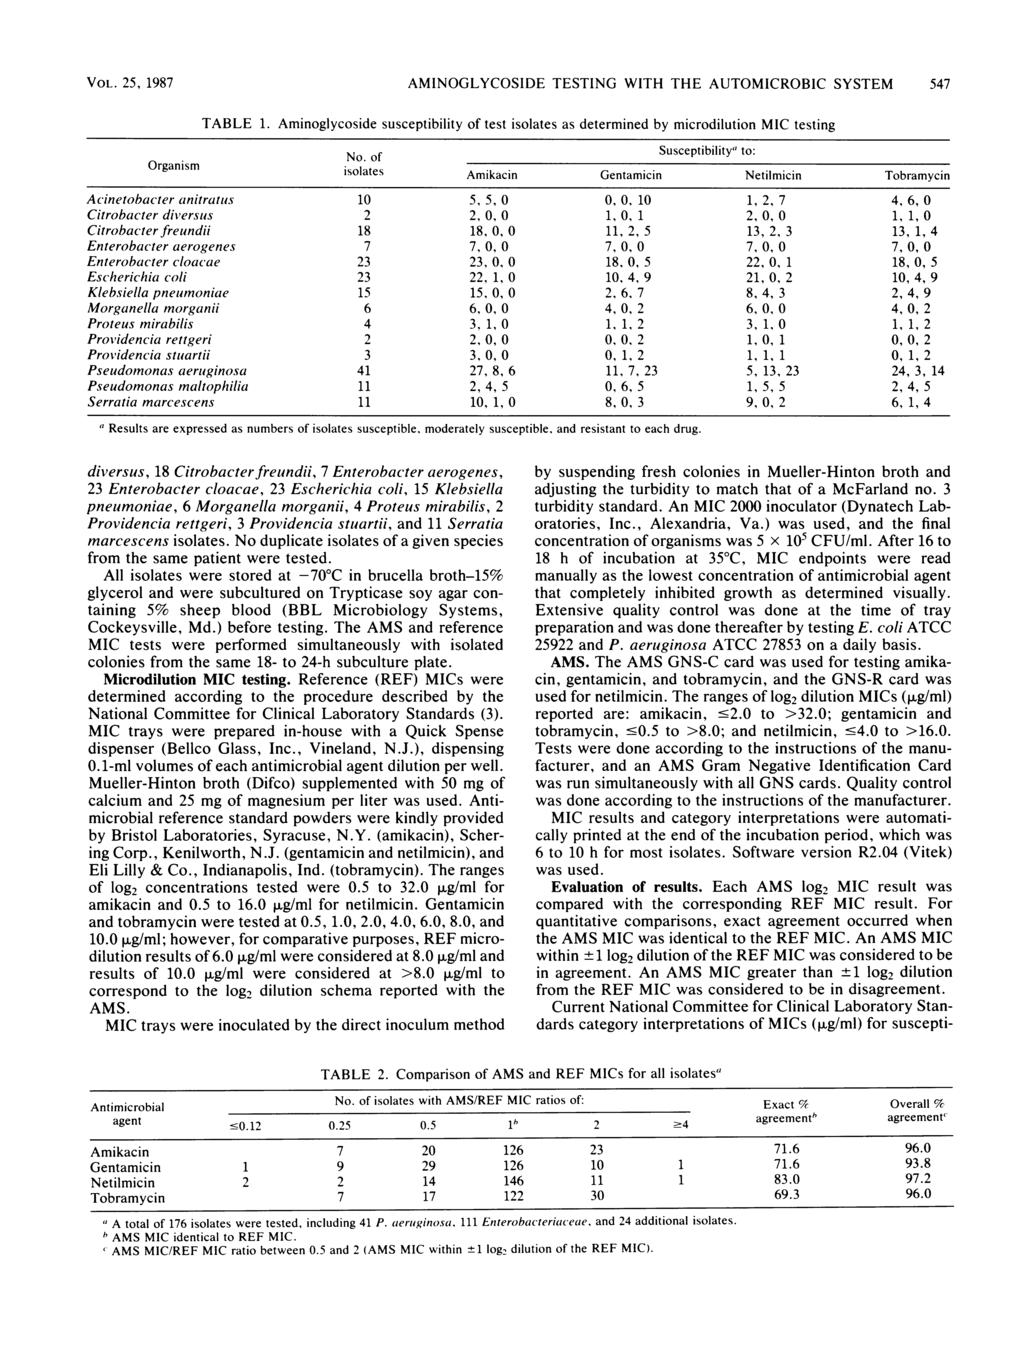 VOL. 25, 1987 AMINOGLYCOSIDE TESTING WITH THE AUTOMICROBIC SYSTEM 547 TABLE 1. Aminoglycoside susceptibility of test isolates as determined by microdilution MIC testing Susceptibility" to: No.